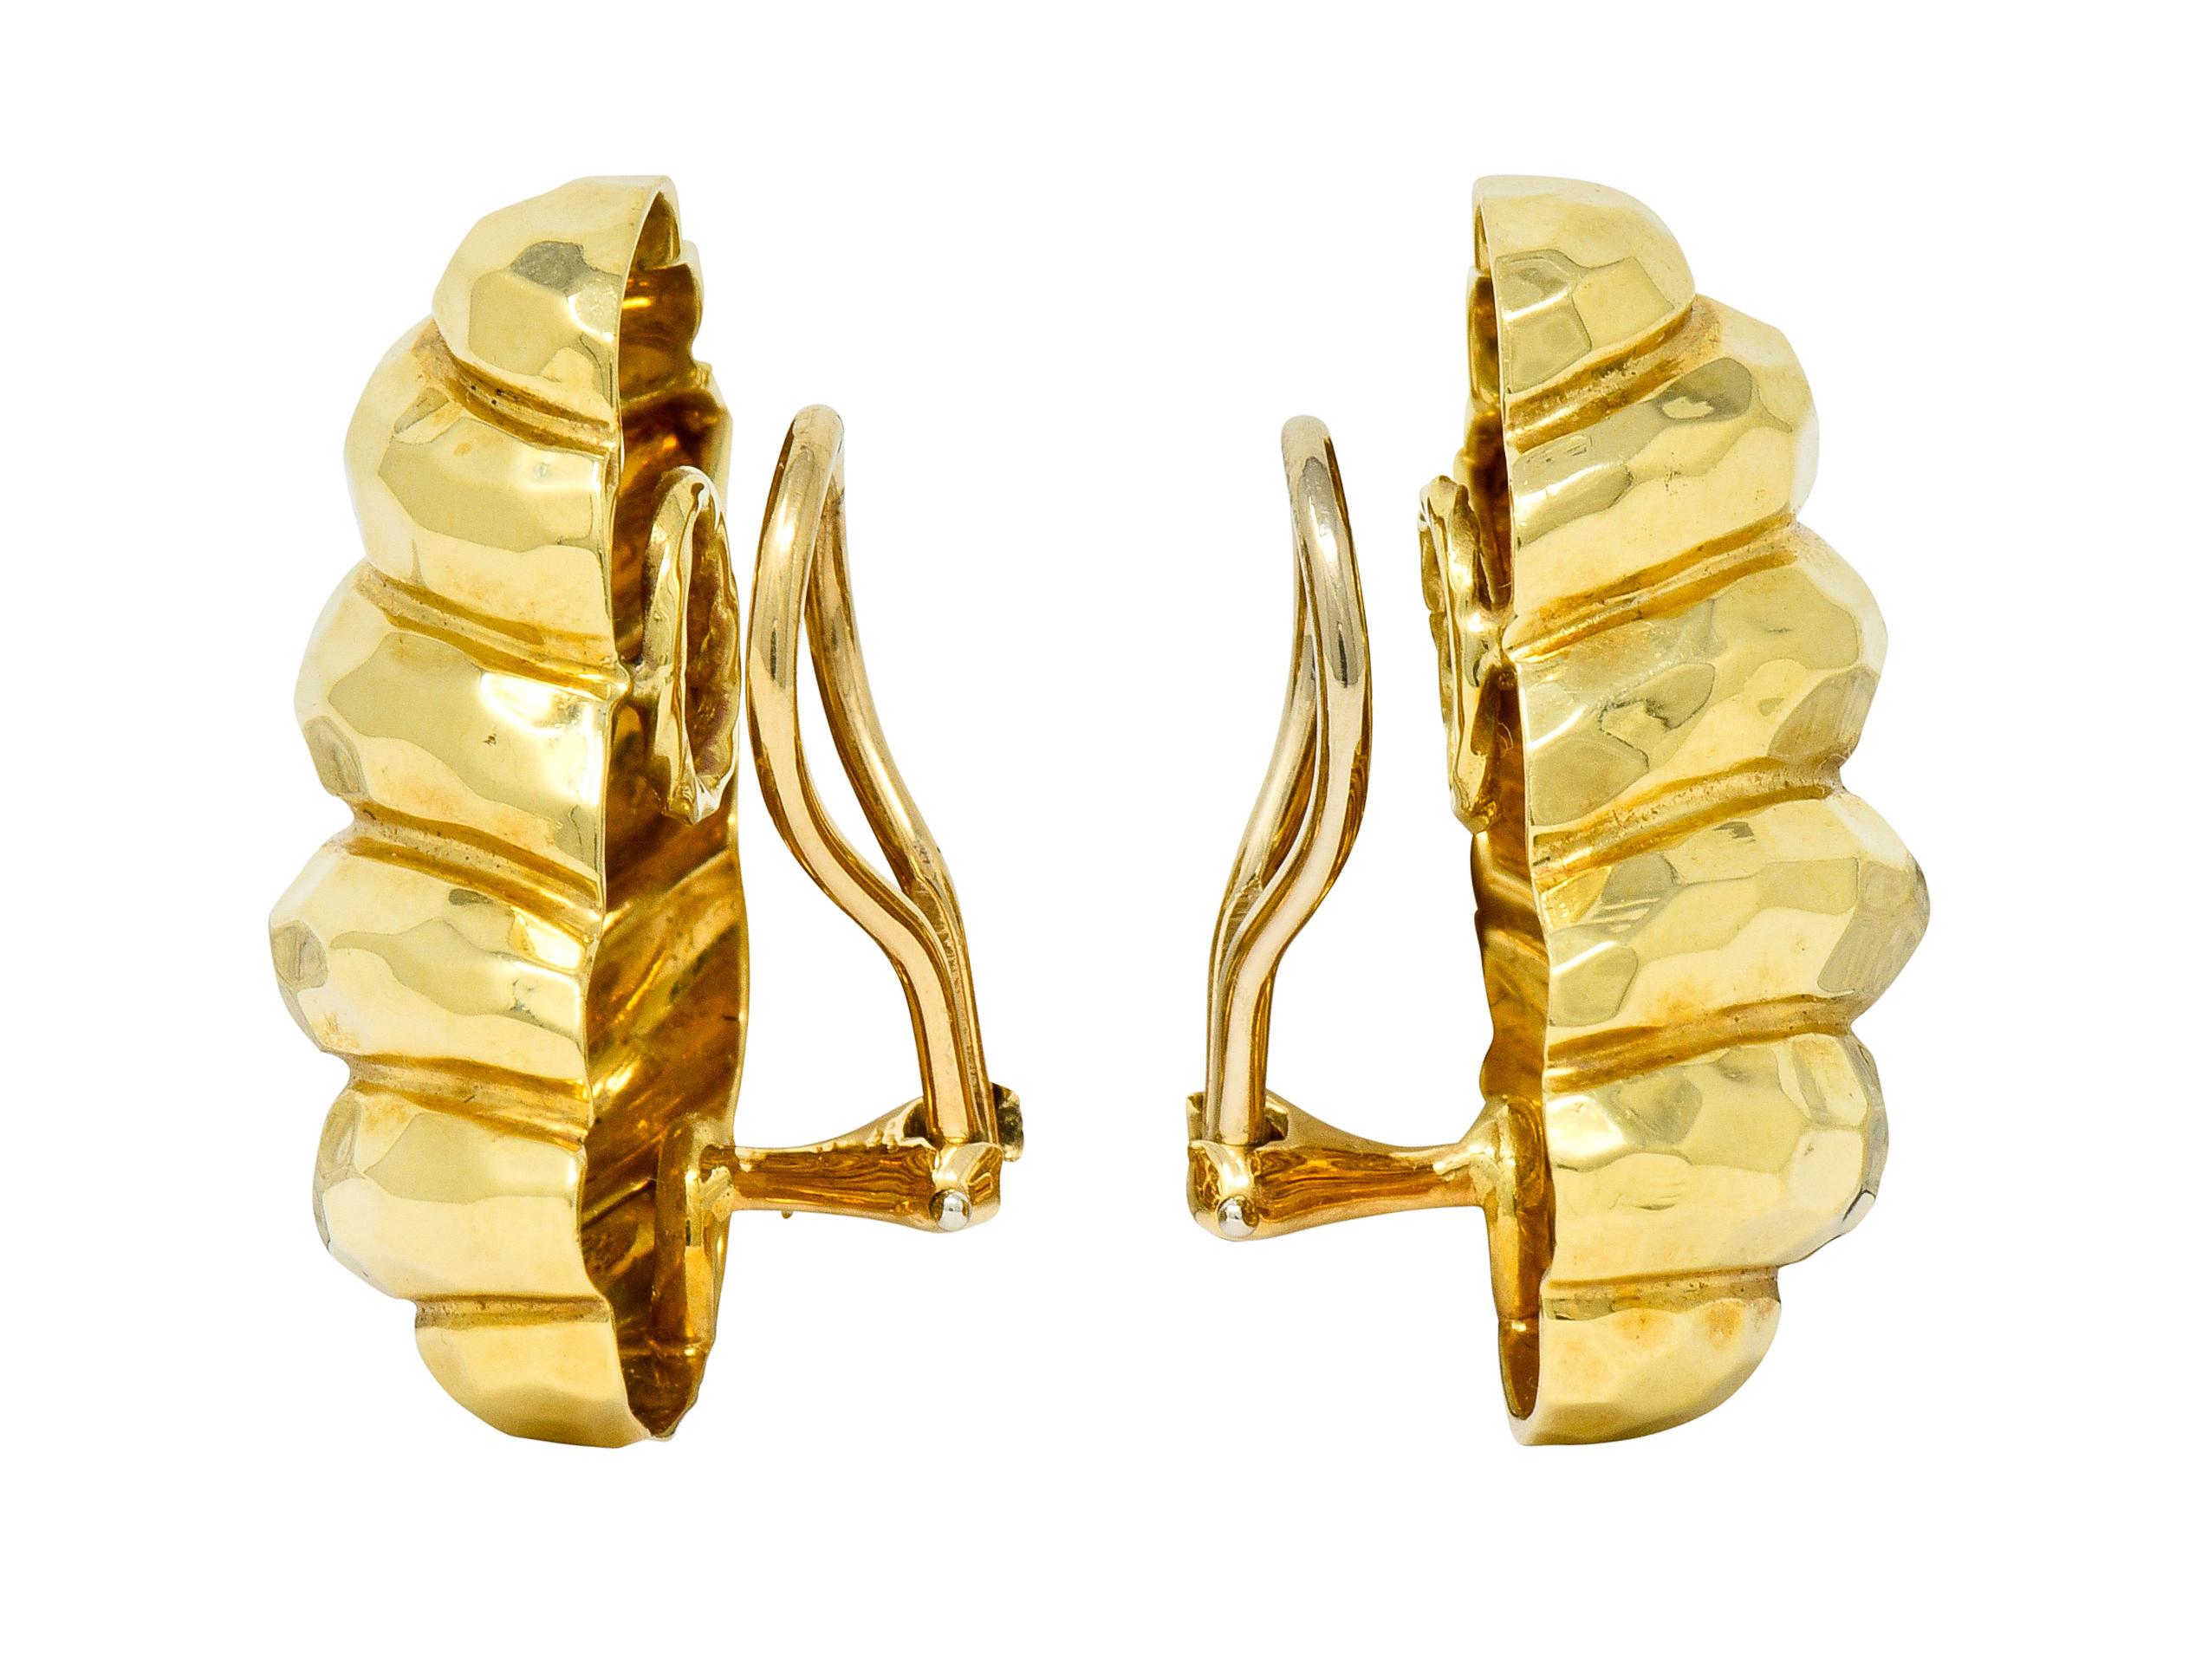 Ear-clip earrings designed a domed form twisted into several polished gold segments

Featuring a hammered finish

Completed by hinged omega backs

One earring is signed Dunay and stamped 18K for 18 karat gold

Circa: 1980s

Measures: 13/16 x 1 3/16